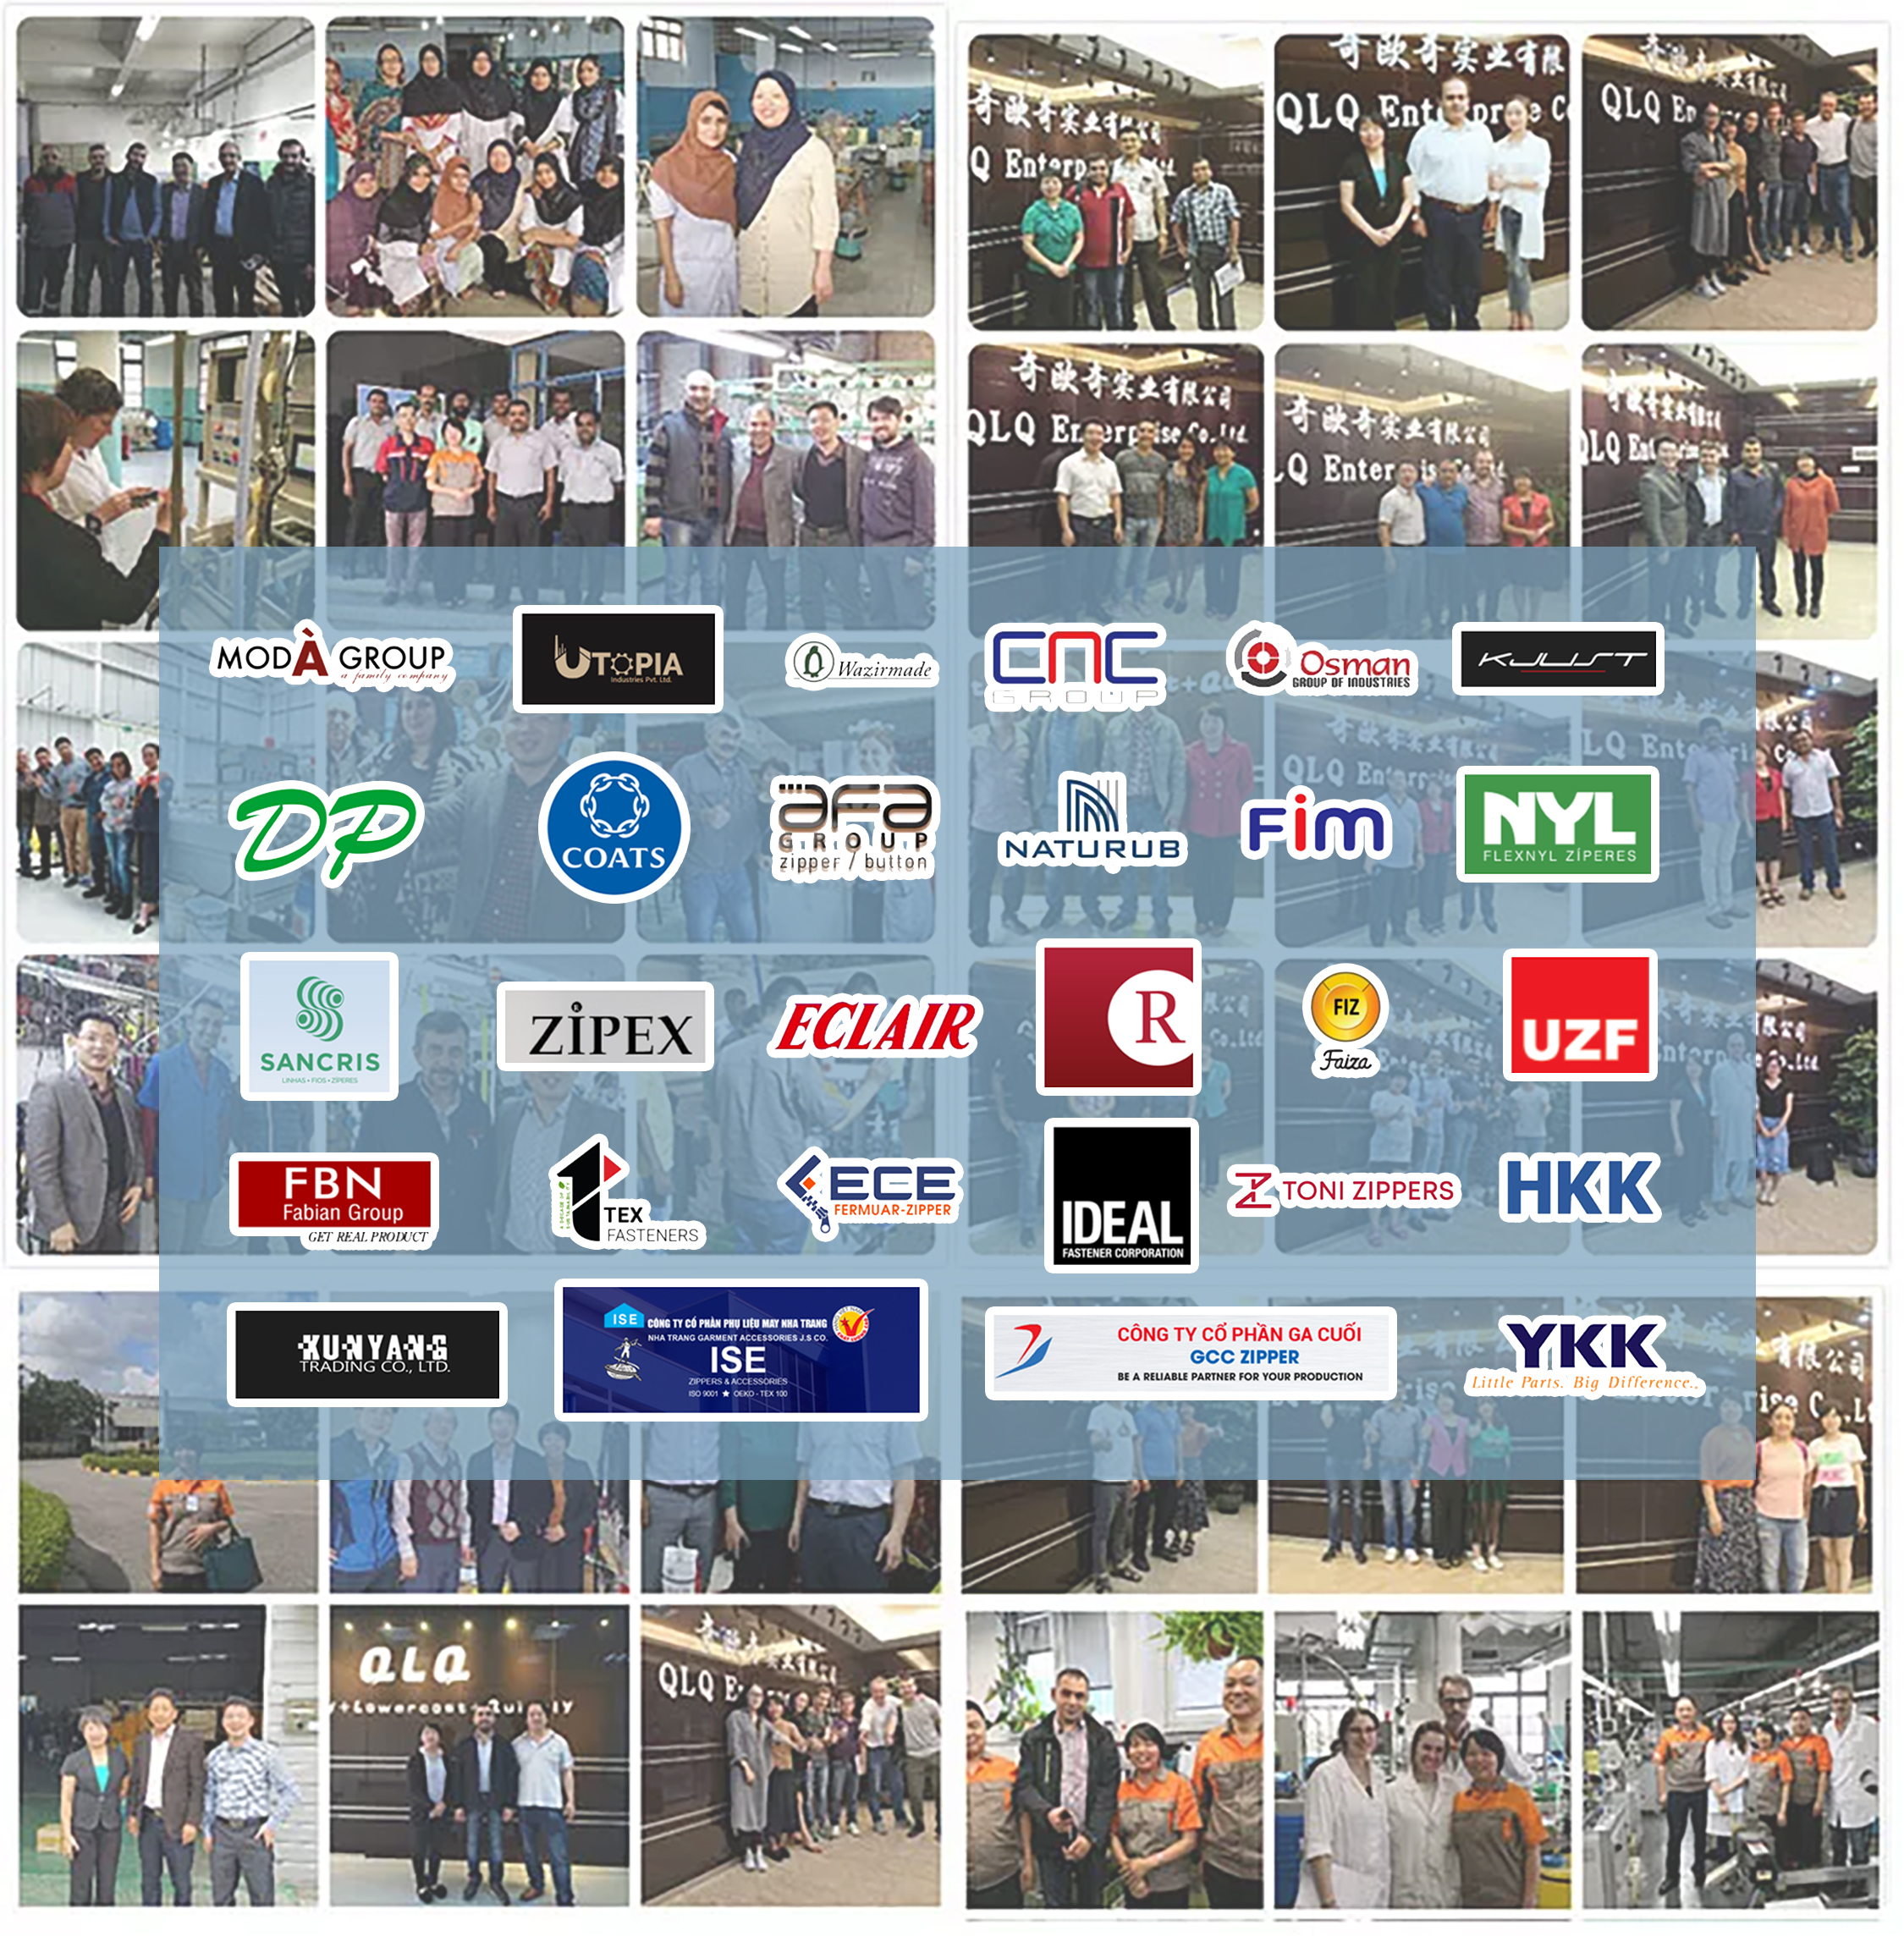 Our cooperation partners